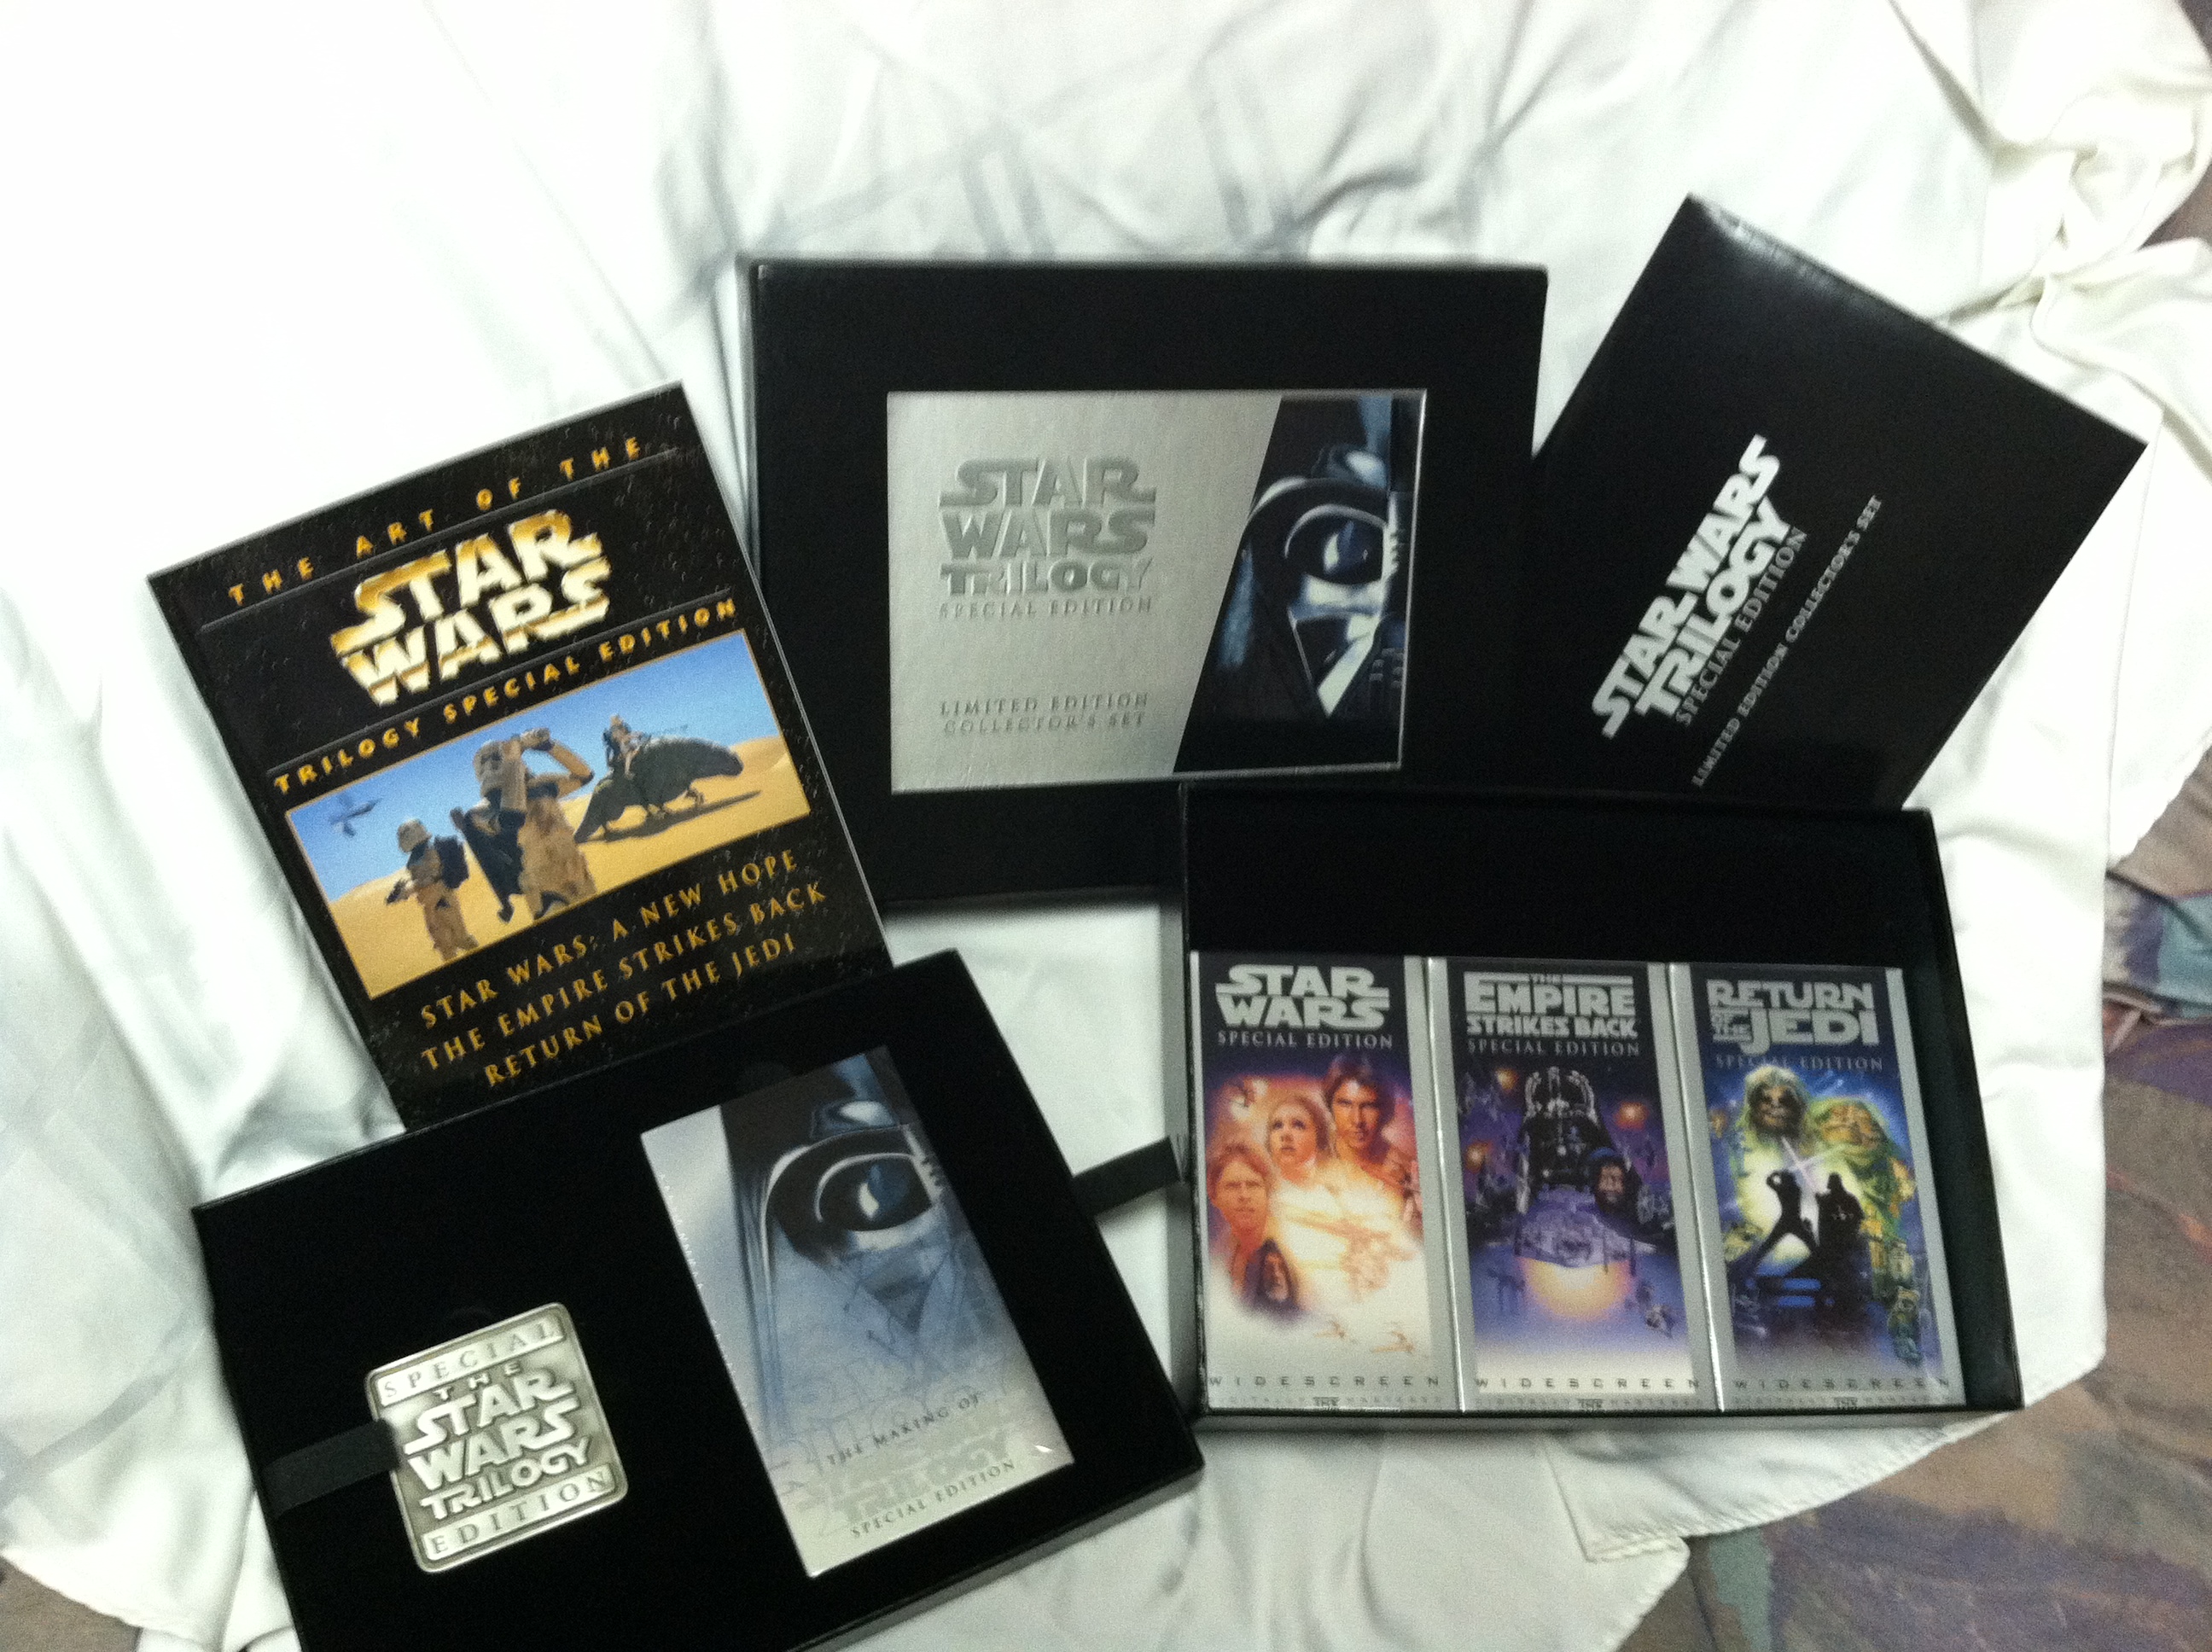 star wars trilogy collector's edition book